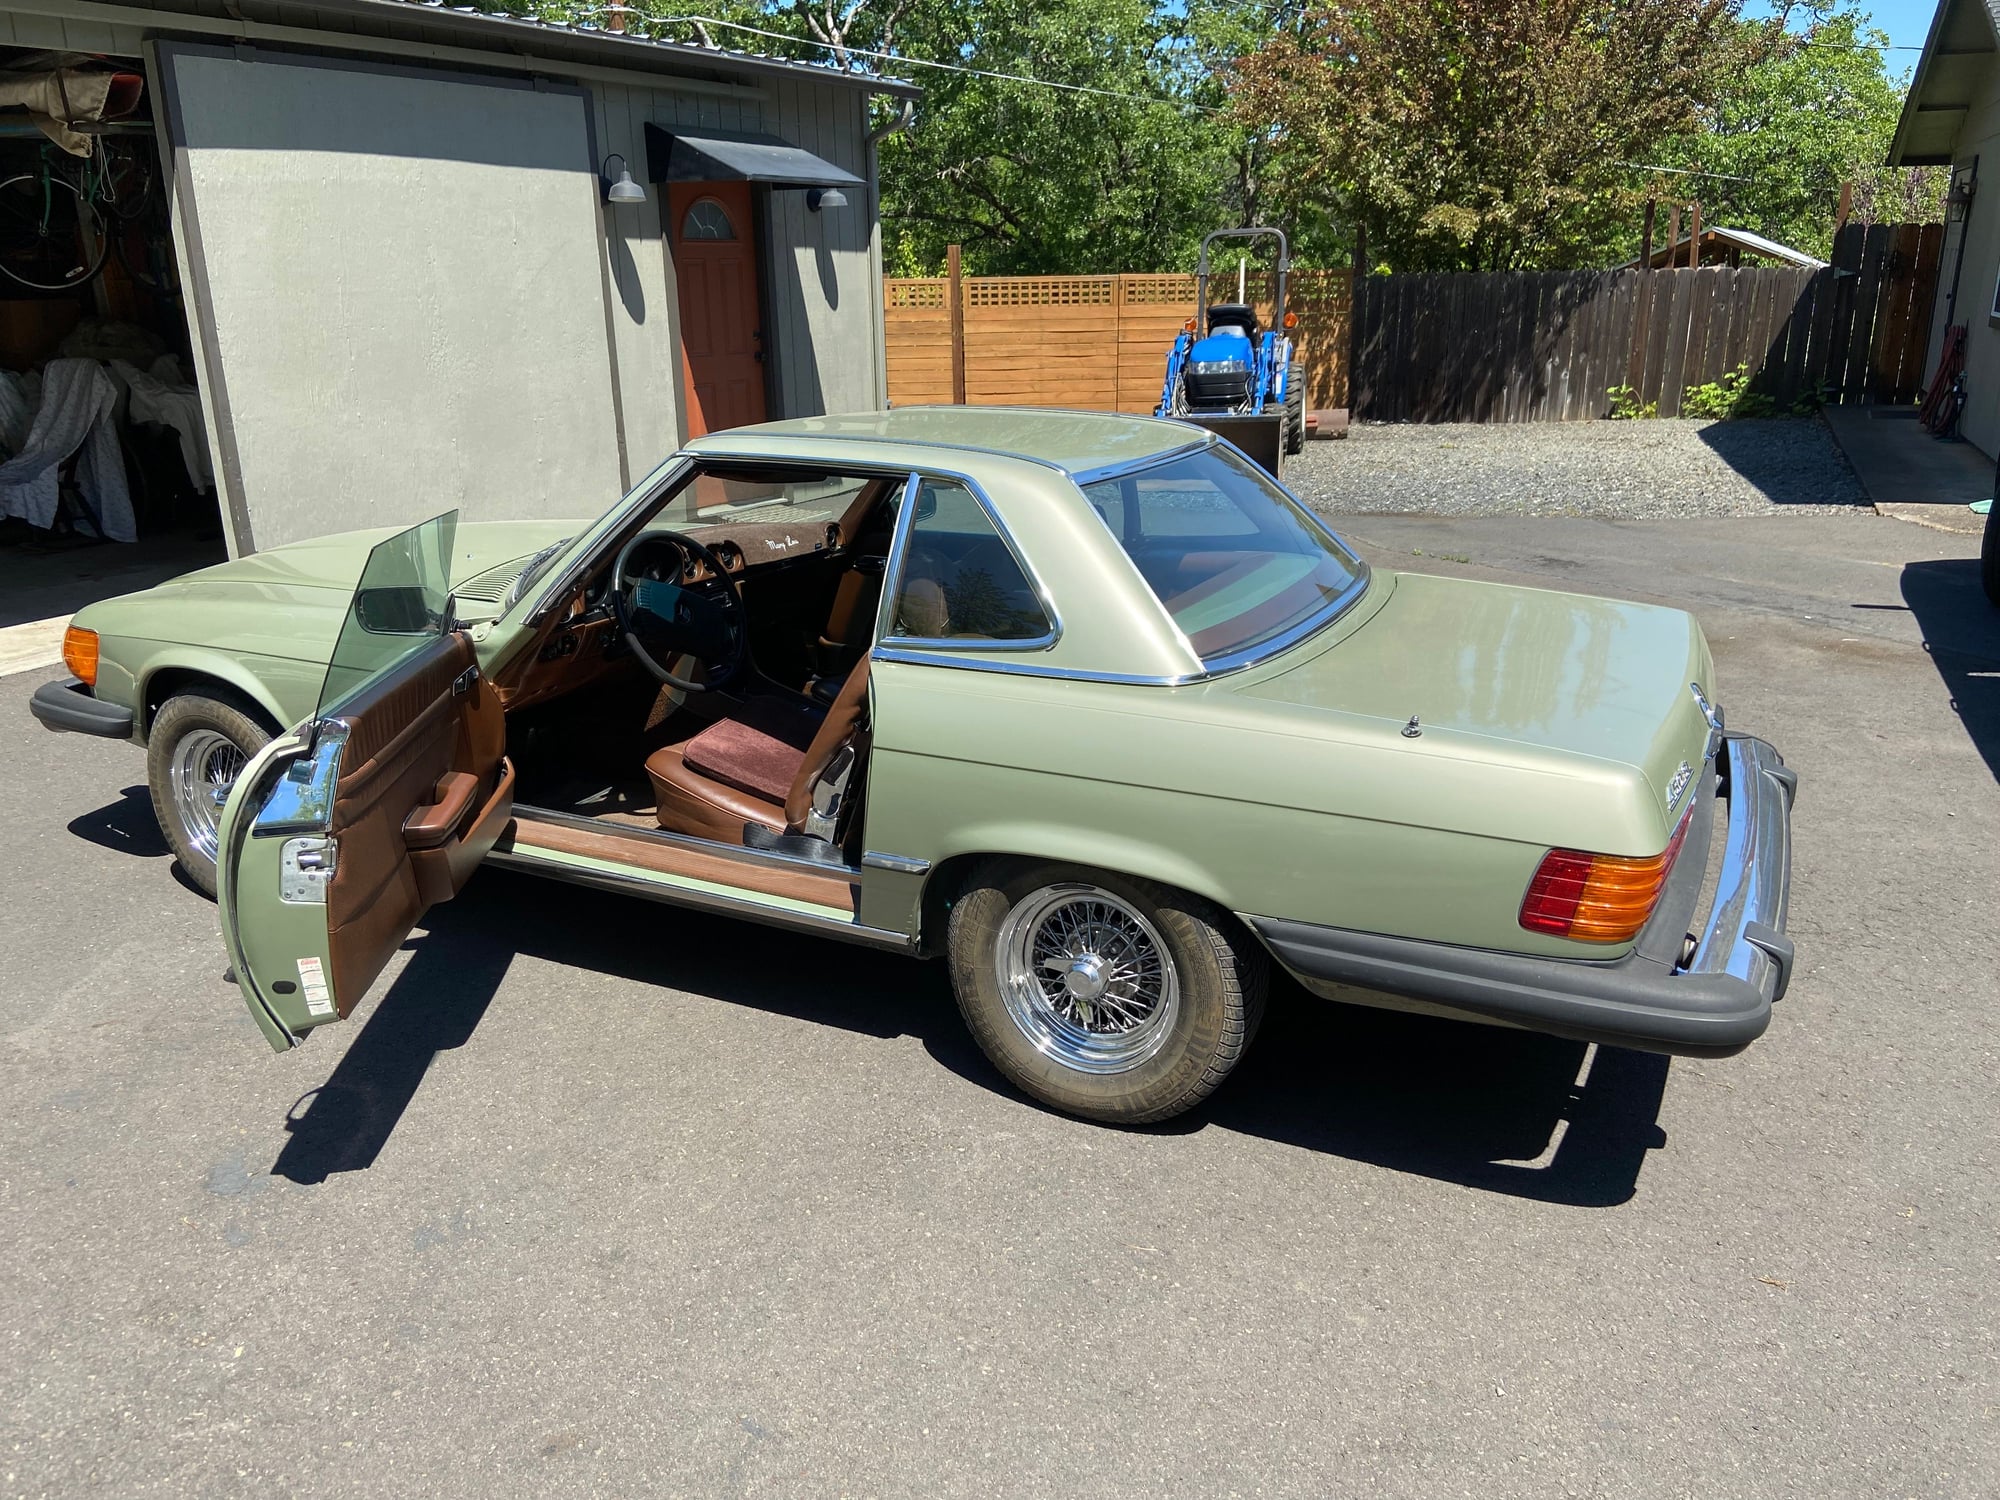 1976 Mercedes-Benz 450SL - Very nice unmolested 1976 450SL (R107) - Used - VIN 10704412029125 - 75,000 Miles - 8 cyl - 2WD - Automatic - Convertible - Other - Jacksonville, OR 97530, United States